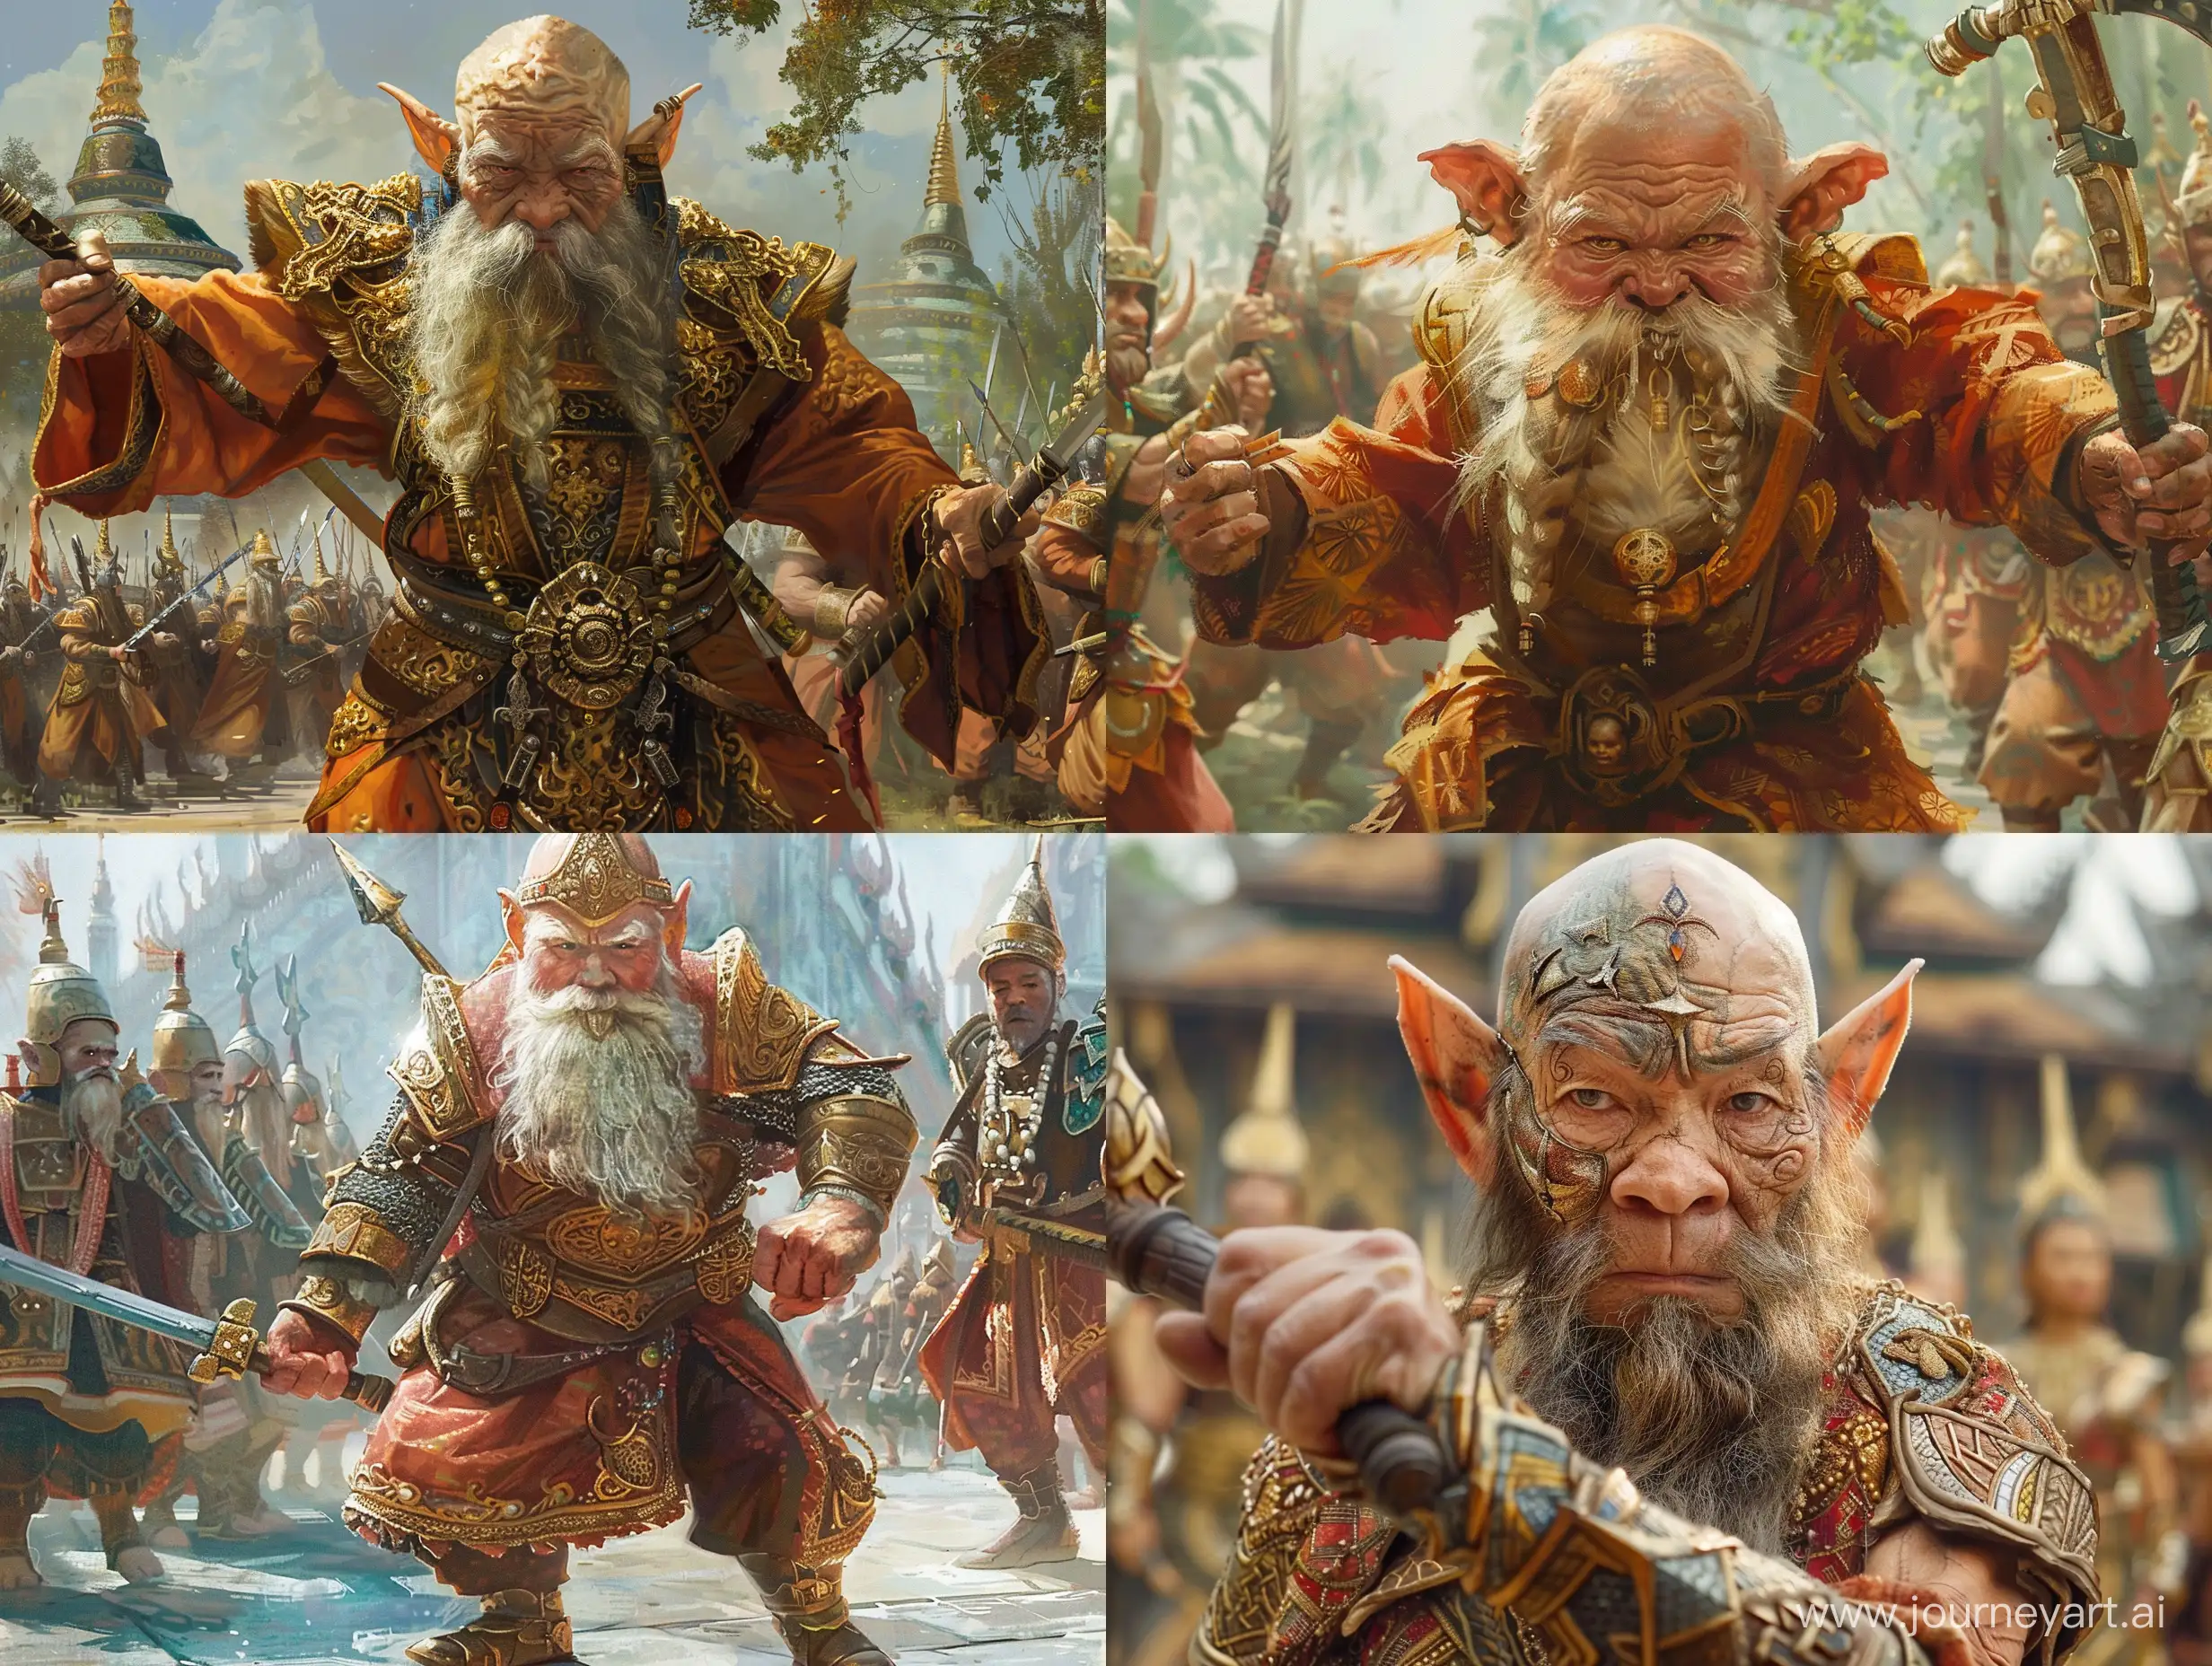 The Thai Dwarf warrior in traditional Thai attire is forming an army Strong body like in the Hobbit movie The appearance is of a Thai person from the Ayutthaya period., style painting